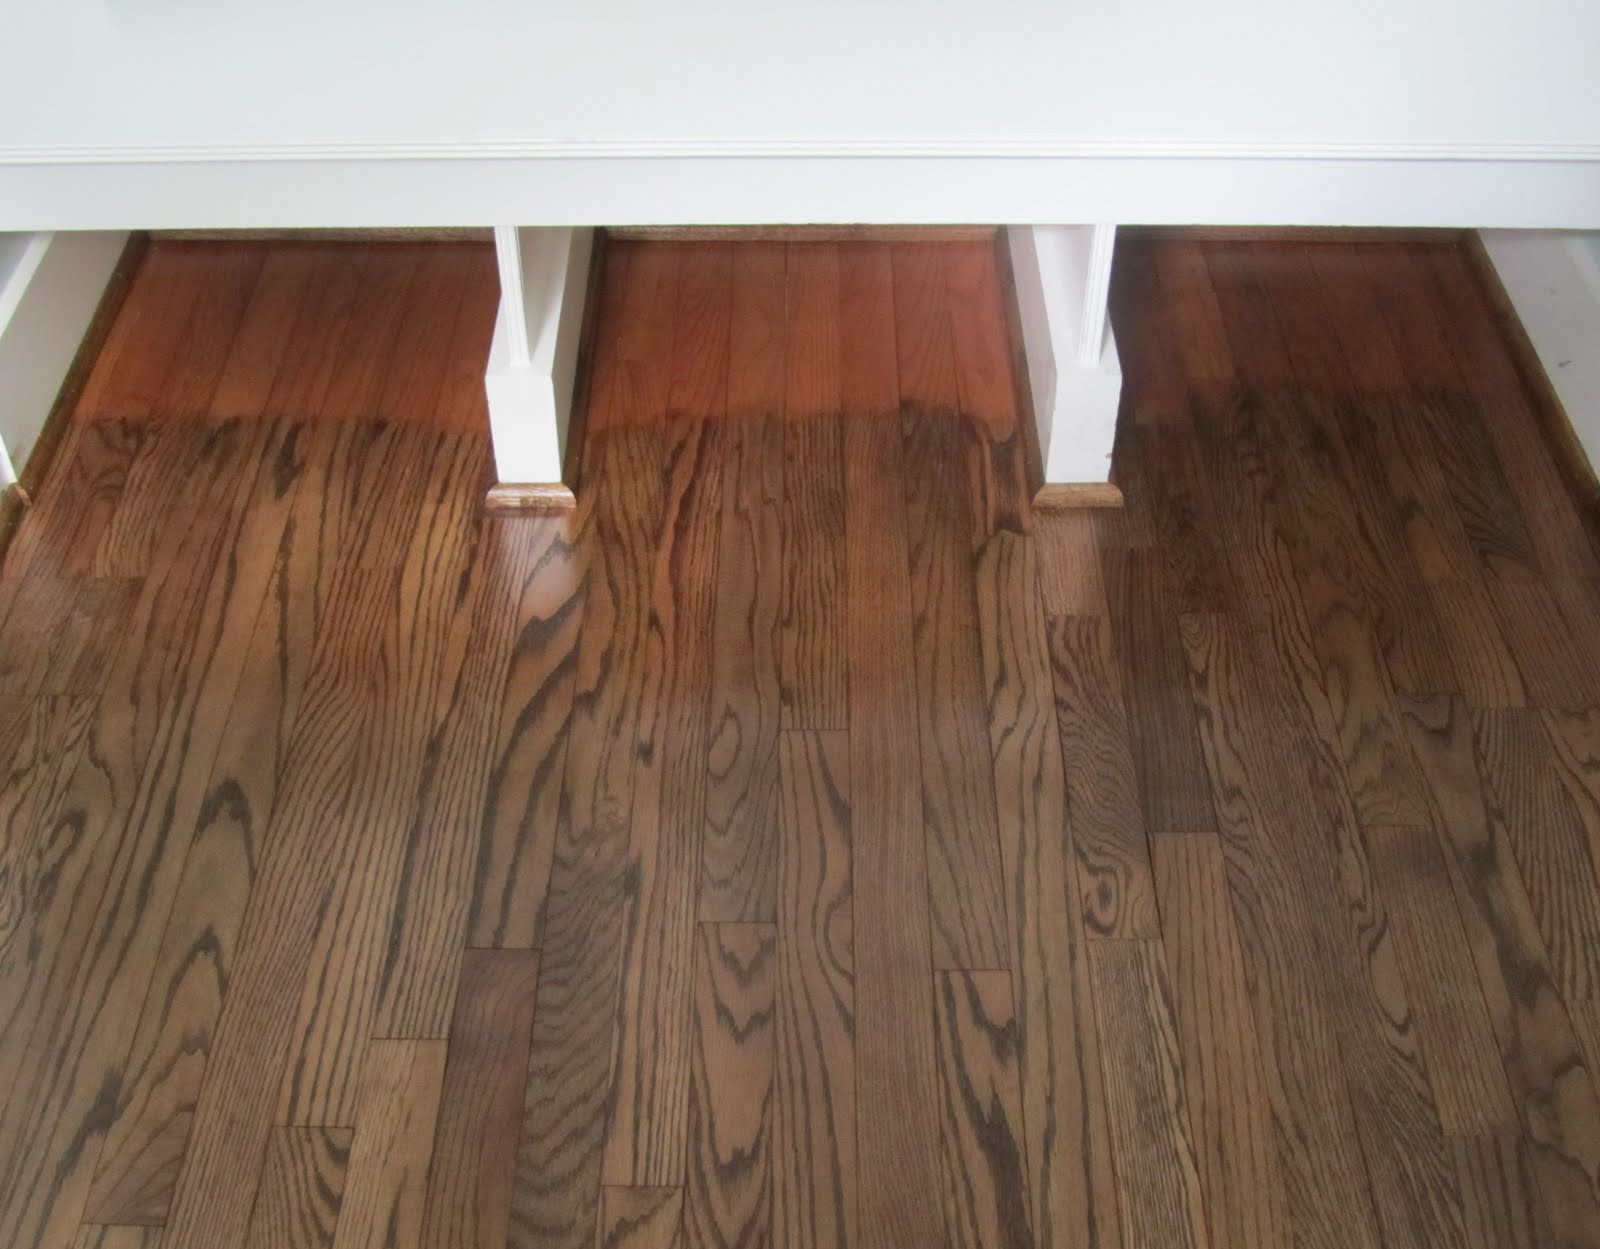 28 Awesome Hardwood Floor Refinishing Eugene oregon 2024 free download hardwood floor refinishing eugene oregon of restaining hardwood floors darker adventures in staining my red oak intended for restaining hardwood floors darker hardwood floor cleaning remove 